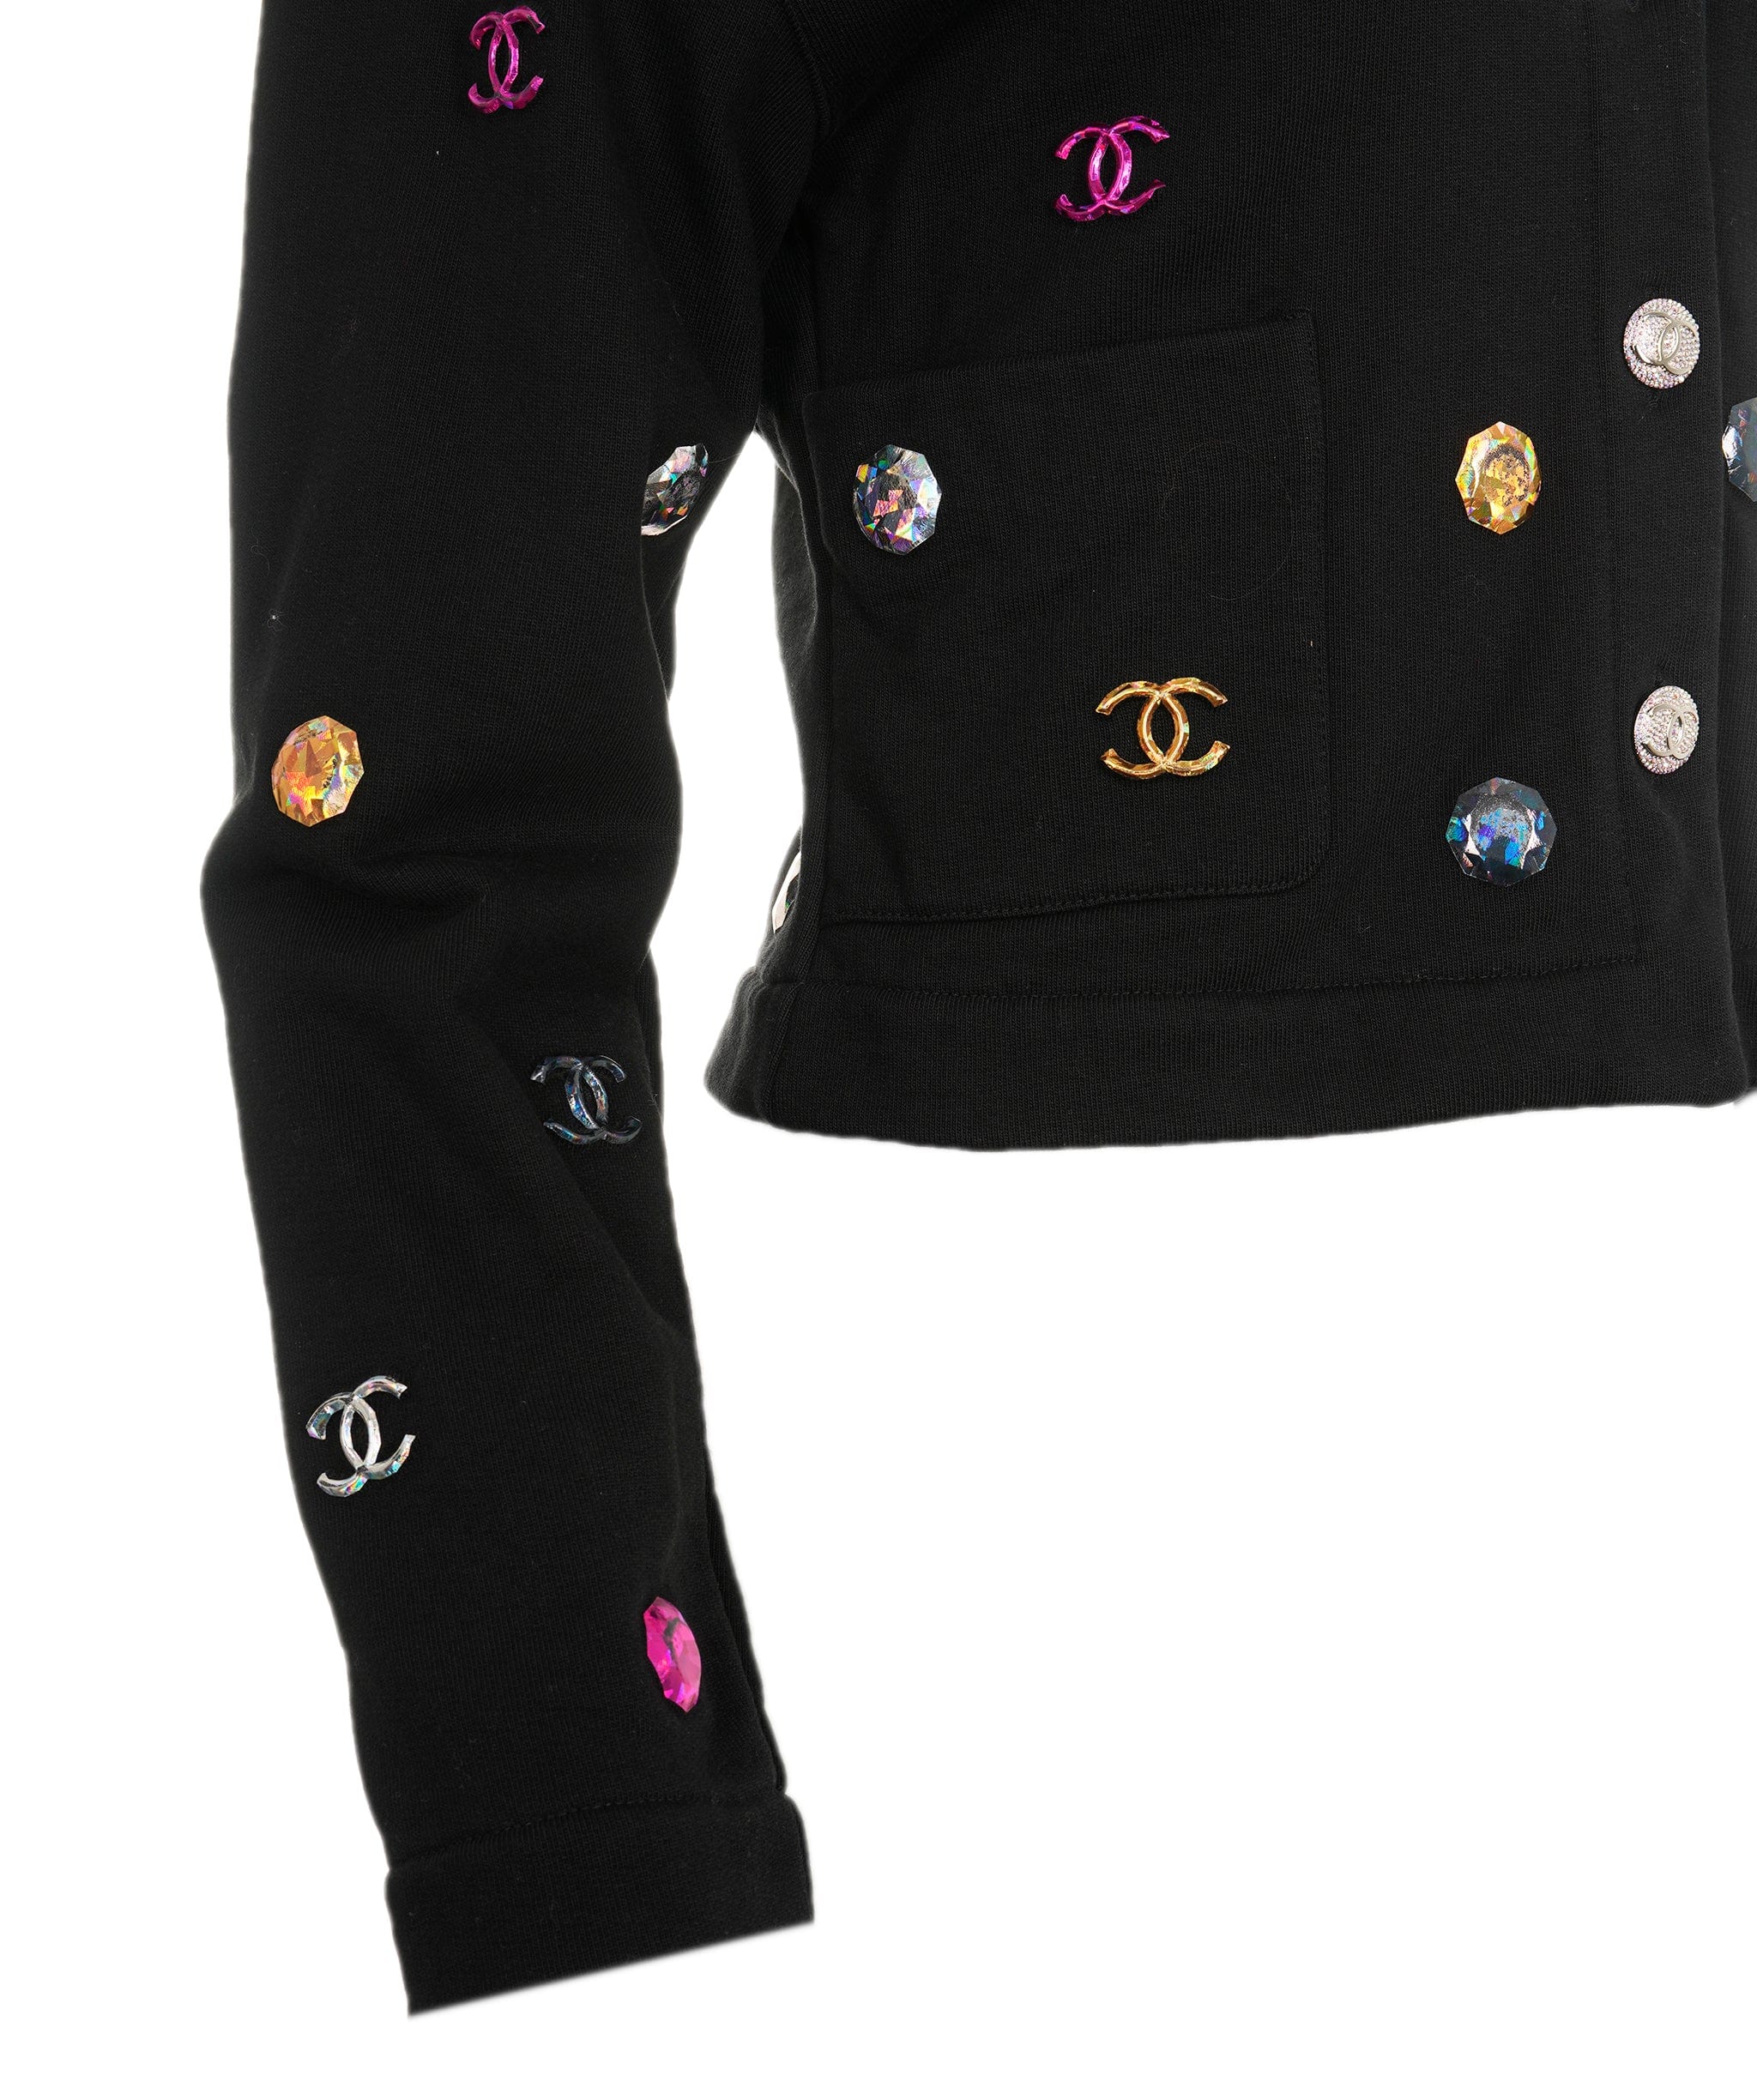 Chanel Chanel Cardigan Black with multicolored patch  FR36 P71493K10289 AVC1849